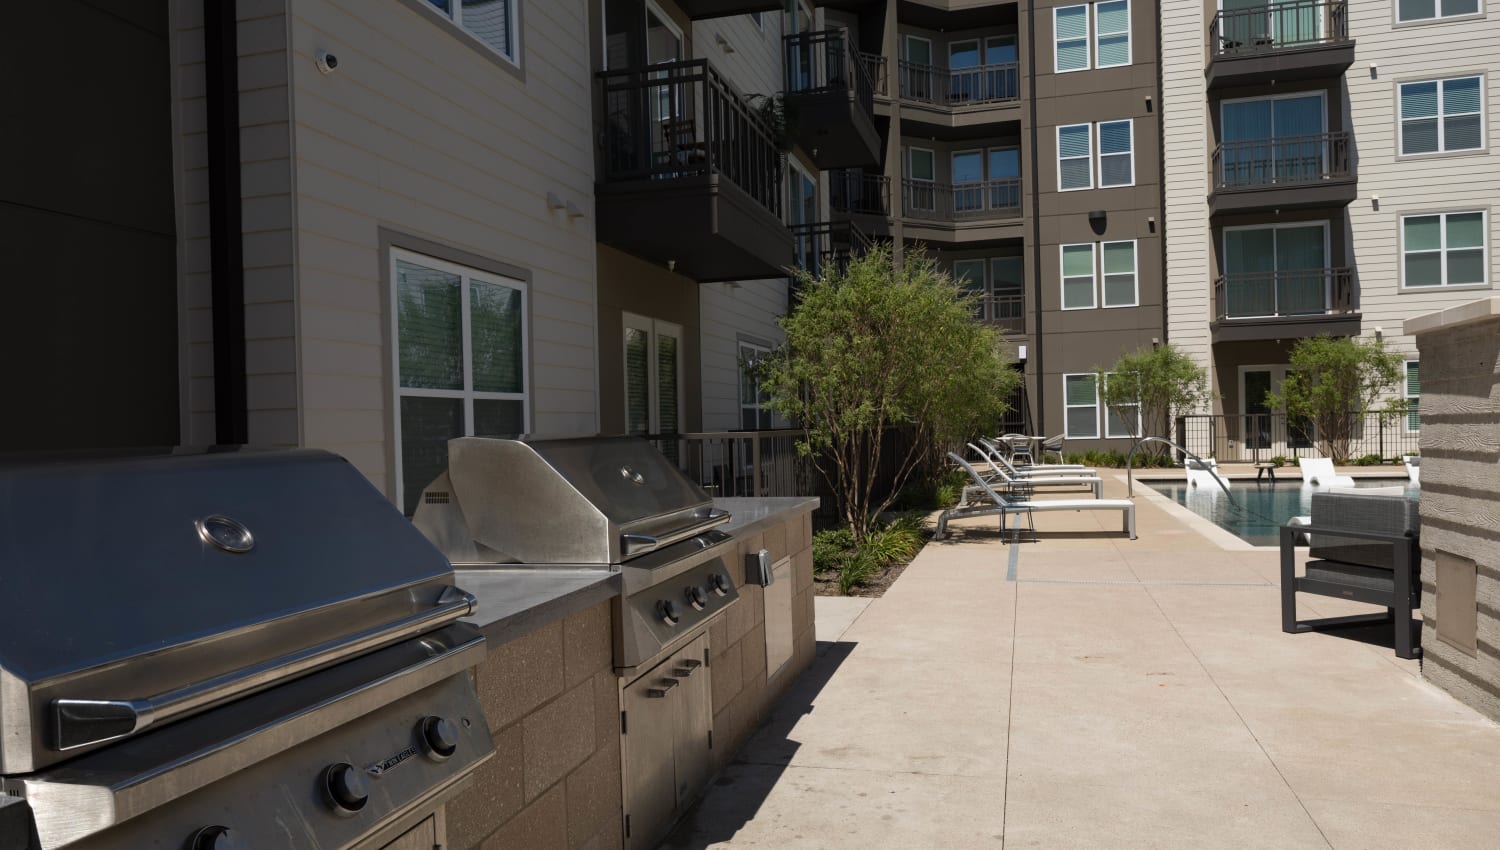 Gas barbecue grills at Lux on Main in Carrollton, Texas